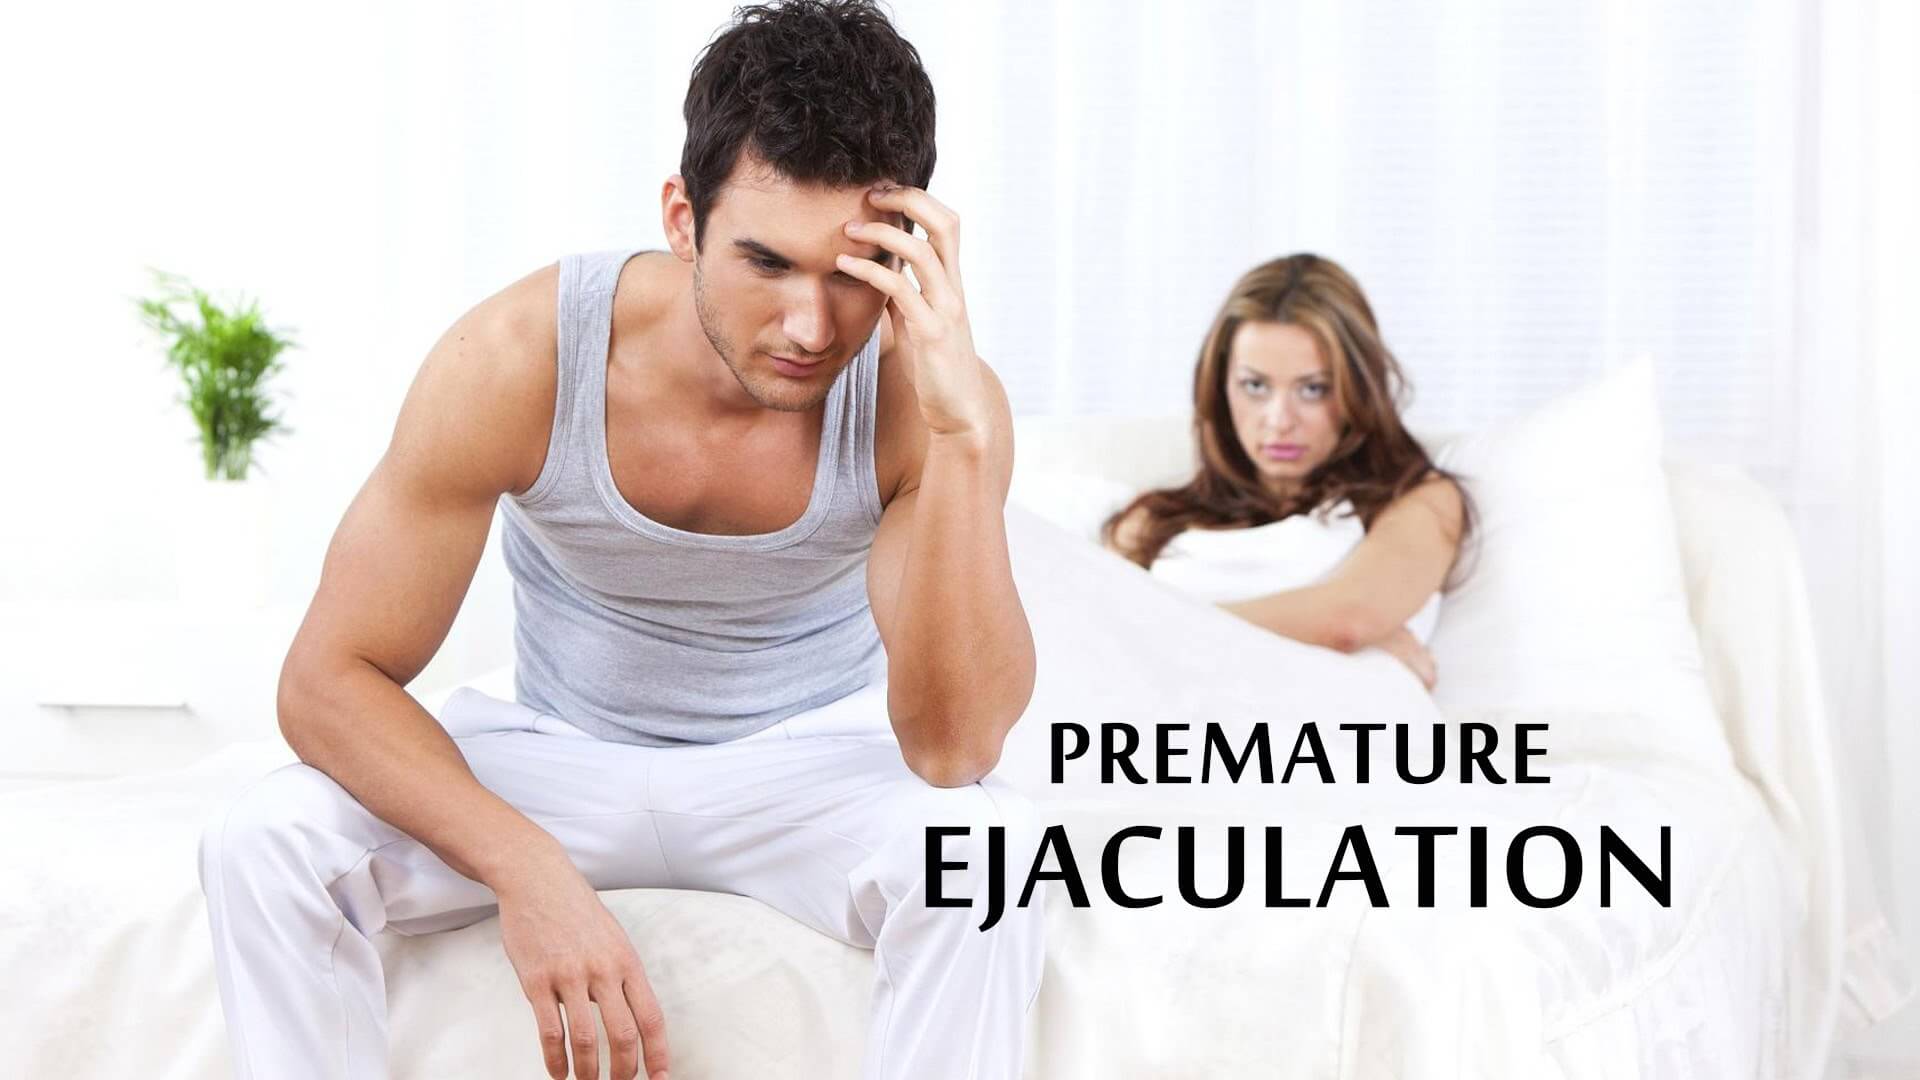 What You Have to Know about Premature Ejaculation